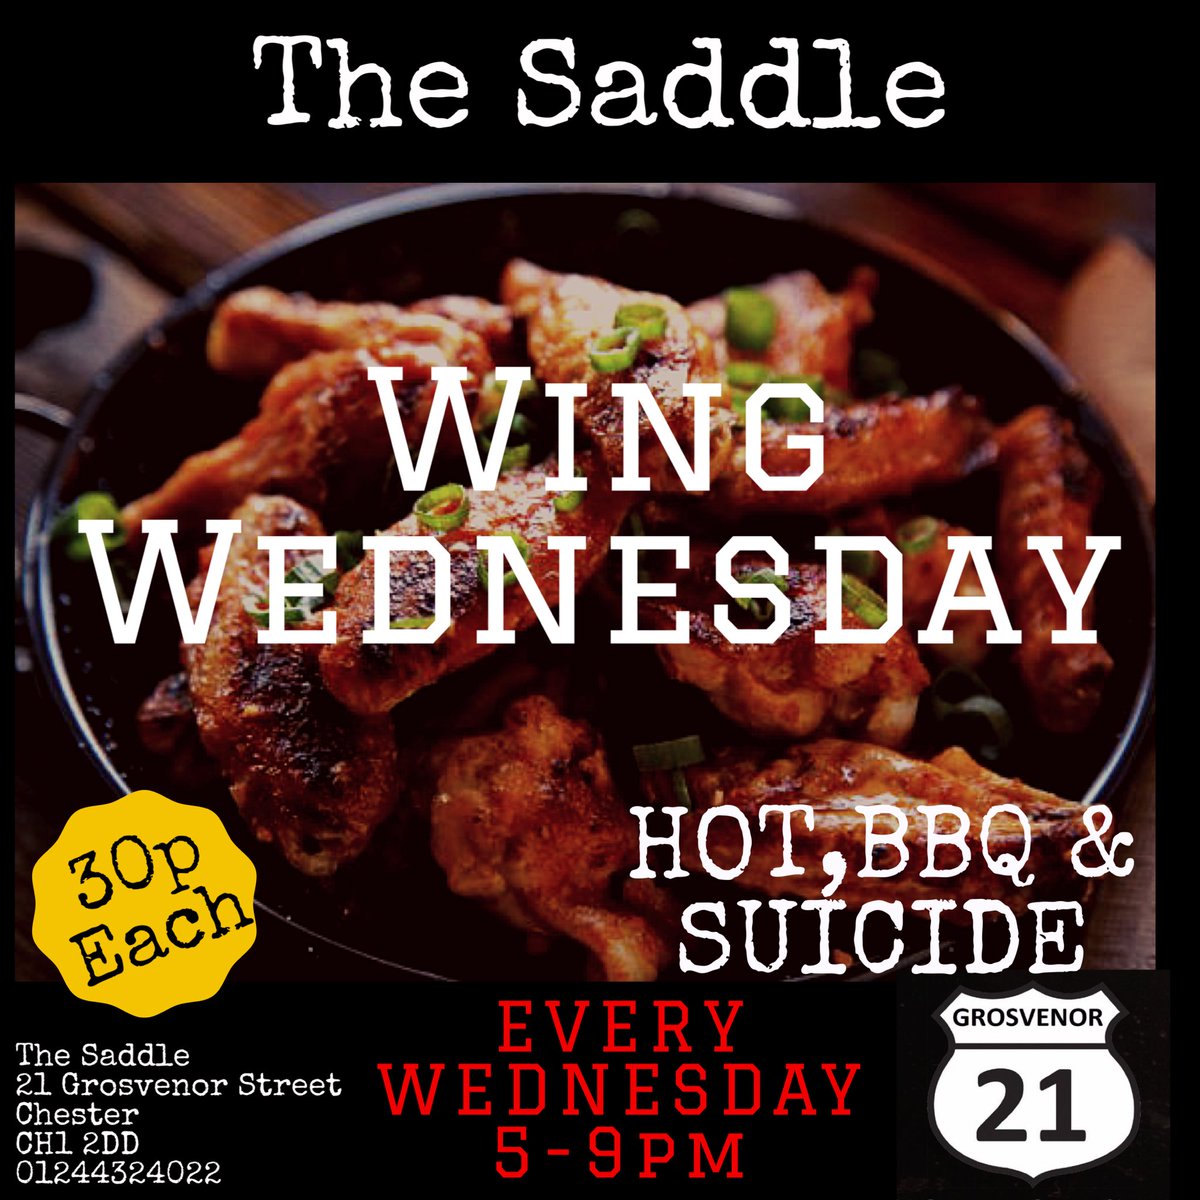 Live Music Wing Wednesday - wings just 30p each @saddle_the @SkintChester @ShitChester @UoCEvents_Mgt @Berni13 @WeLoveChester  @Rach_A_Rama @WeAreChester  @chestertweetsuk  @CH1Chester @starpubsandbars #chester  #chestercity @CH1independents @carlh1610